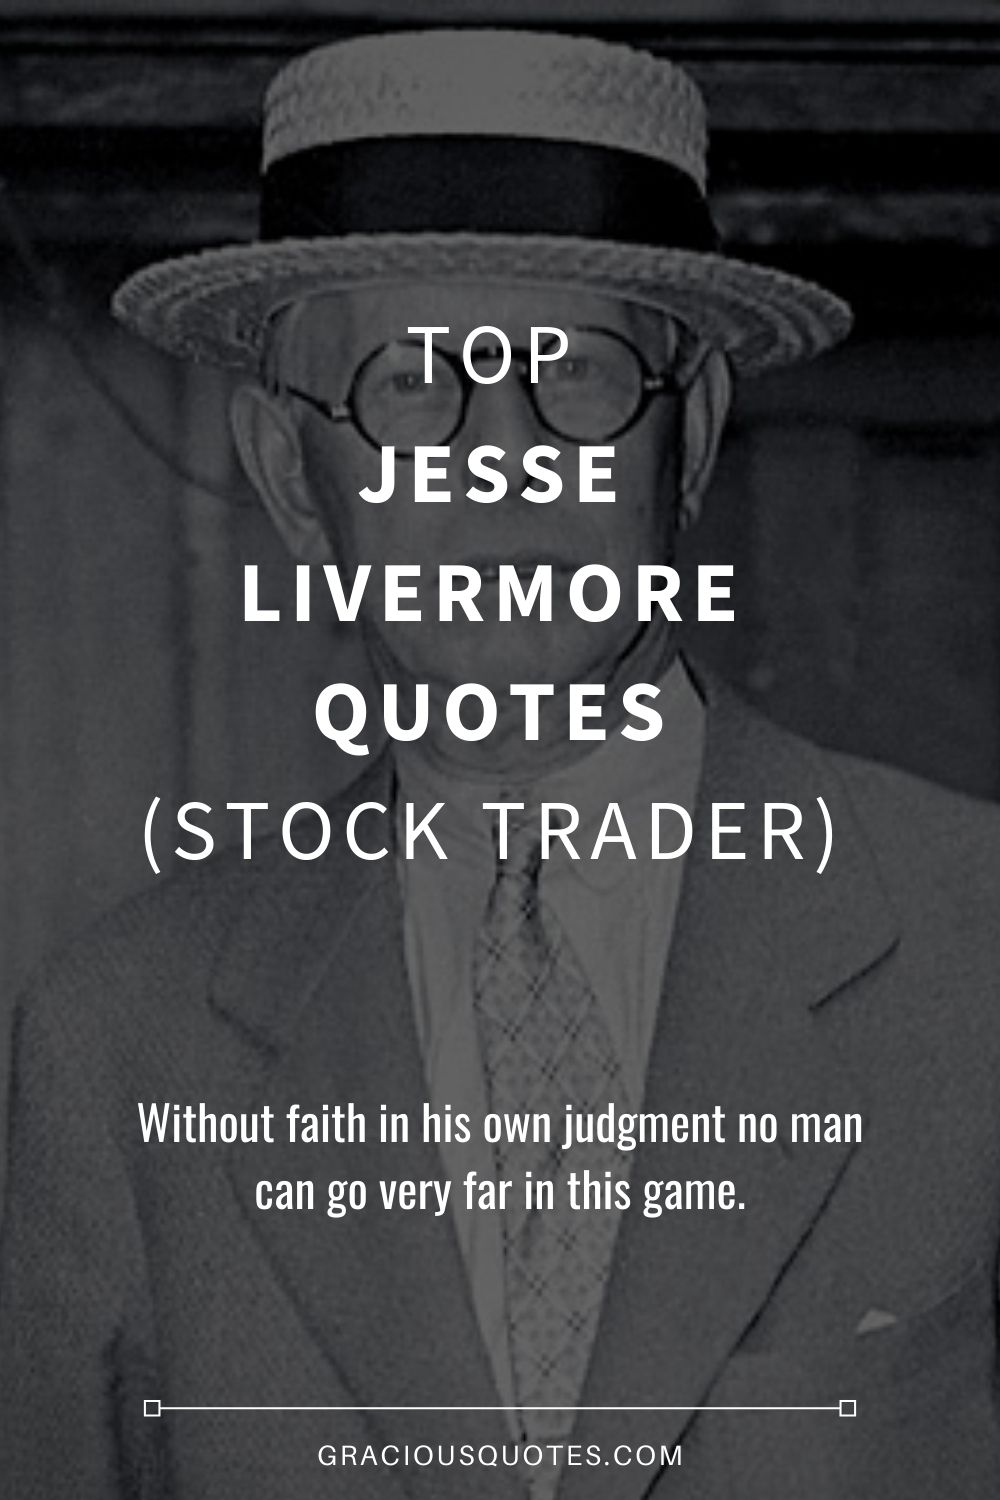 Top Jesse Livermore Quotes (STOCK TRADER) - Gracious Quotes